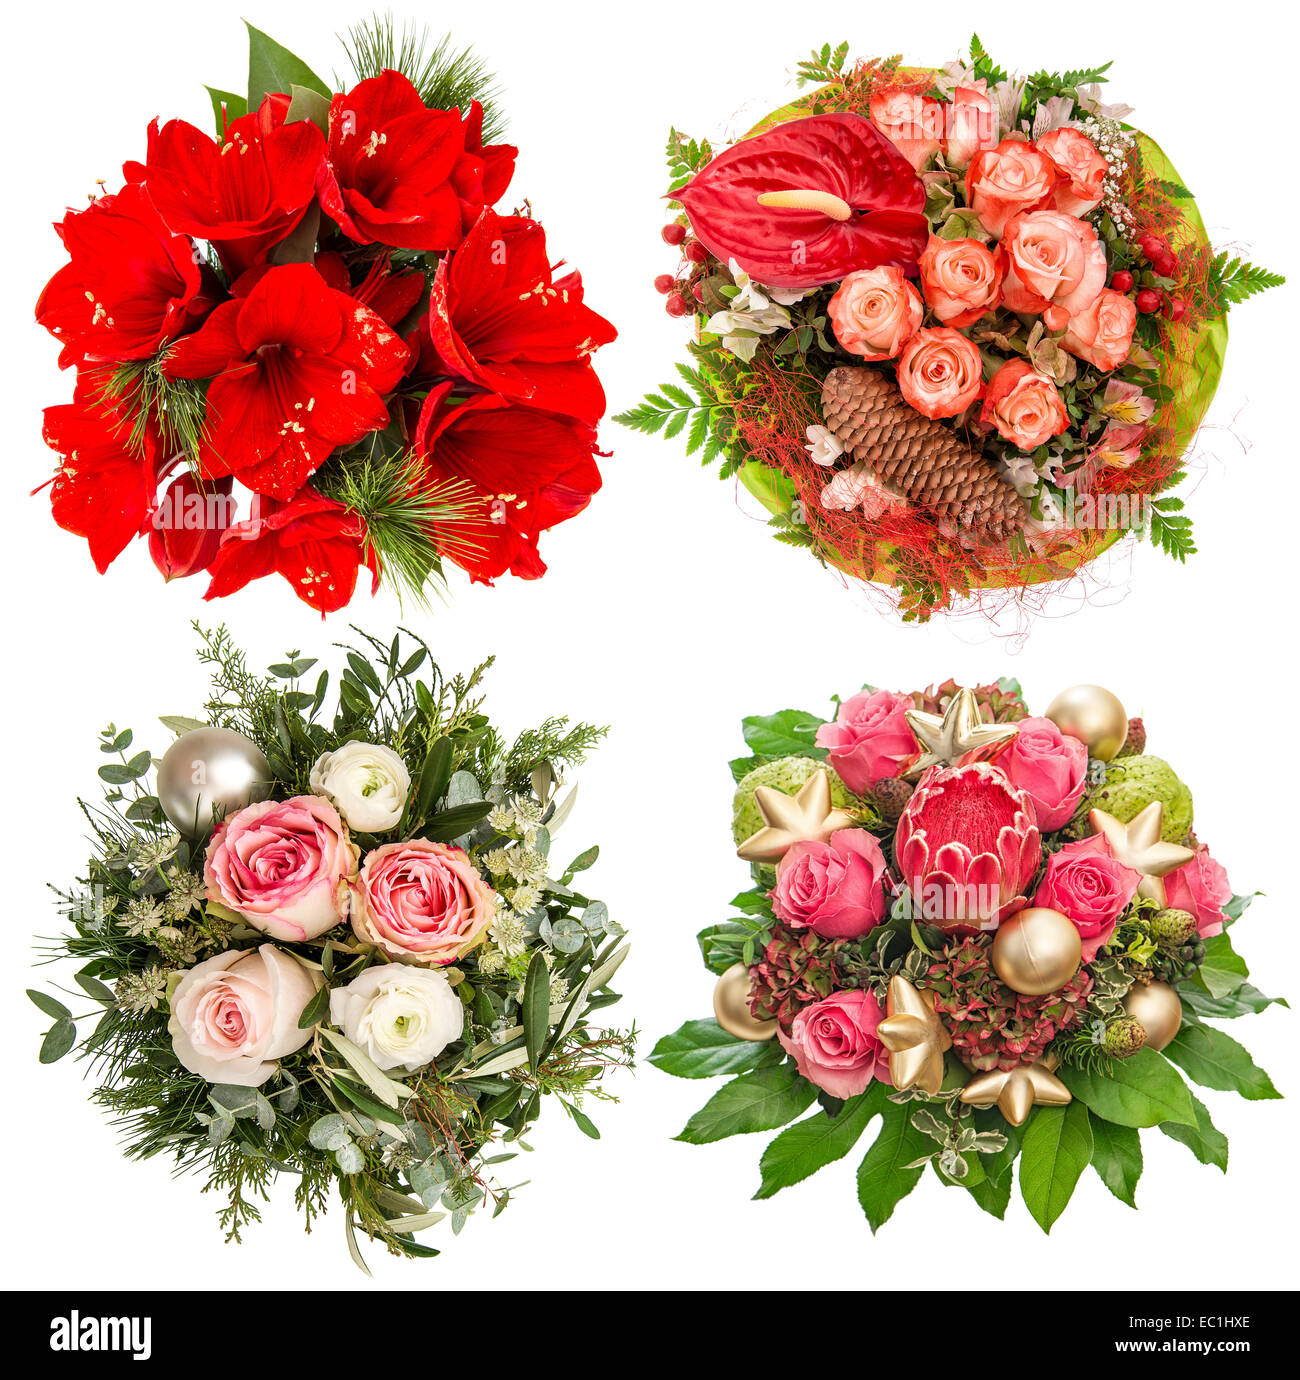 Flowers for Winter Holidays Christmas and New Year. Roses, amaryllis, protea isolated on white background Stock Photo